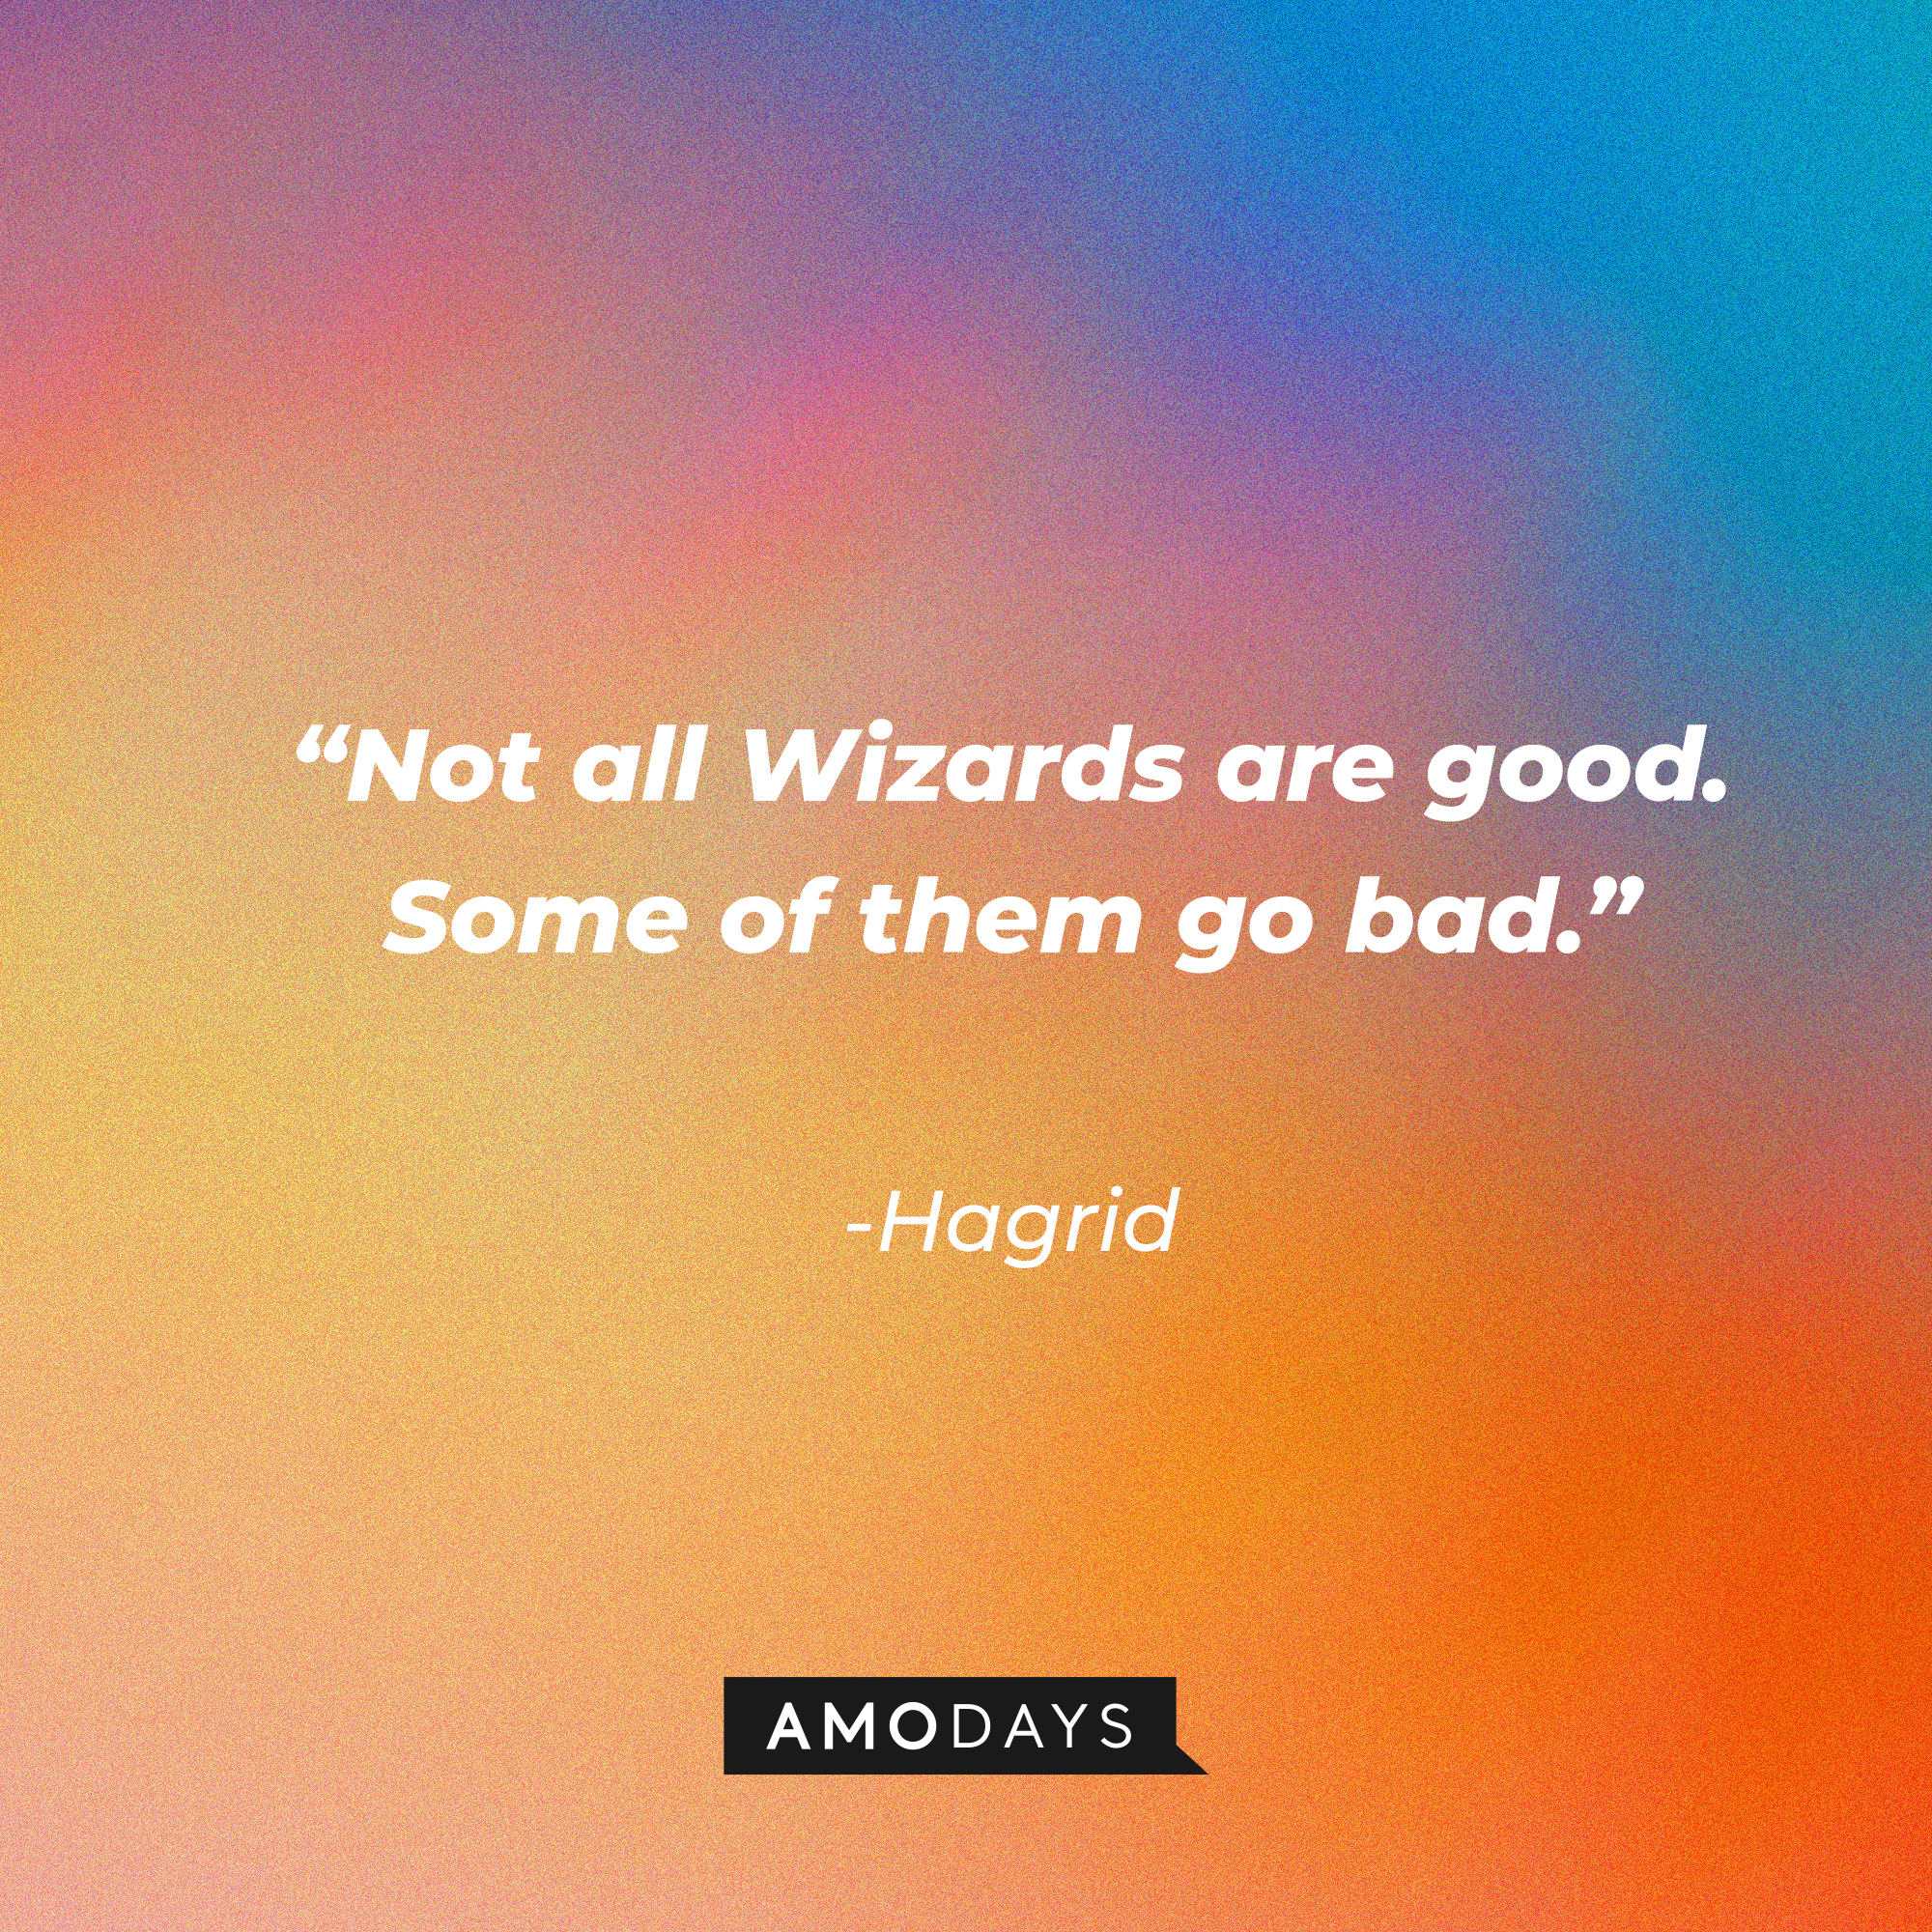 Hagrid's quote: "Not all Wizards are good. Some of them go bad." | Source: AmoDays